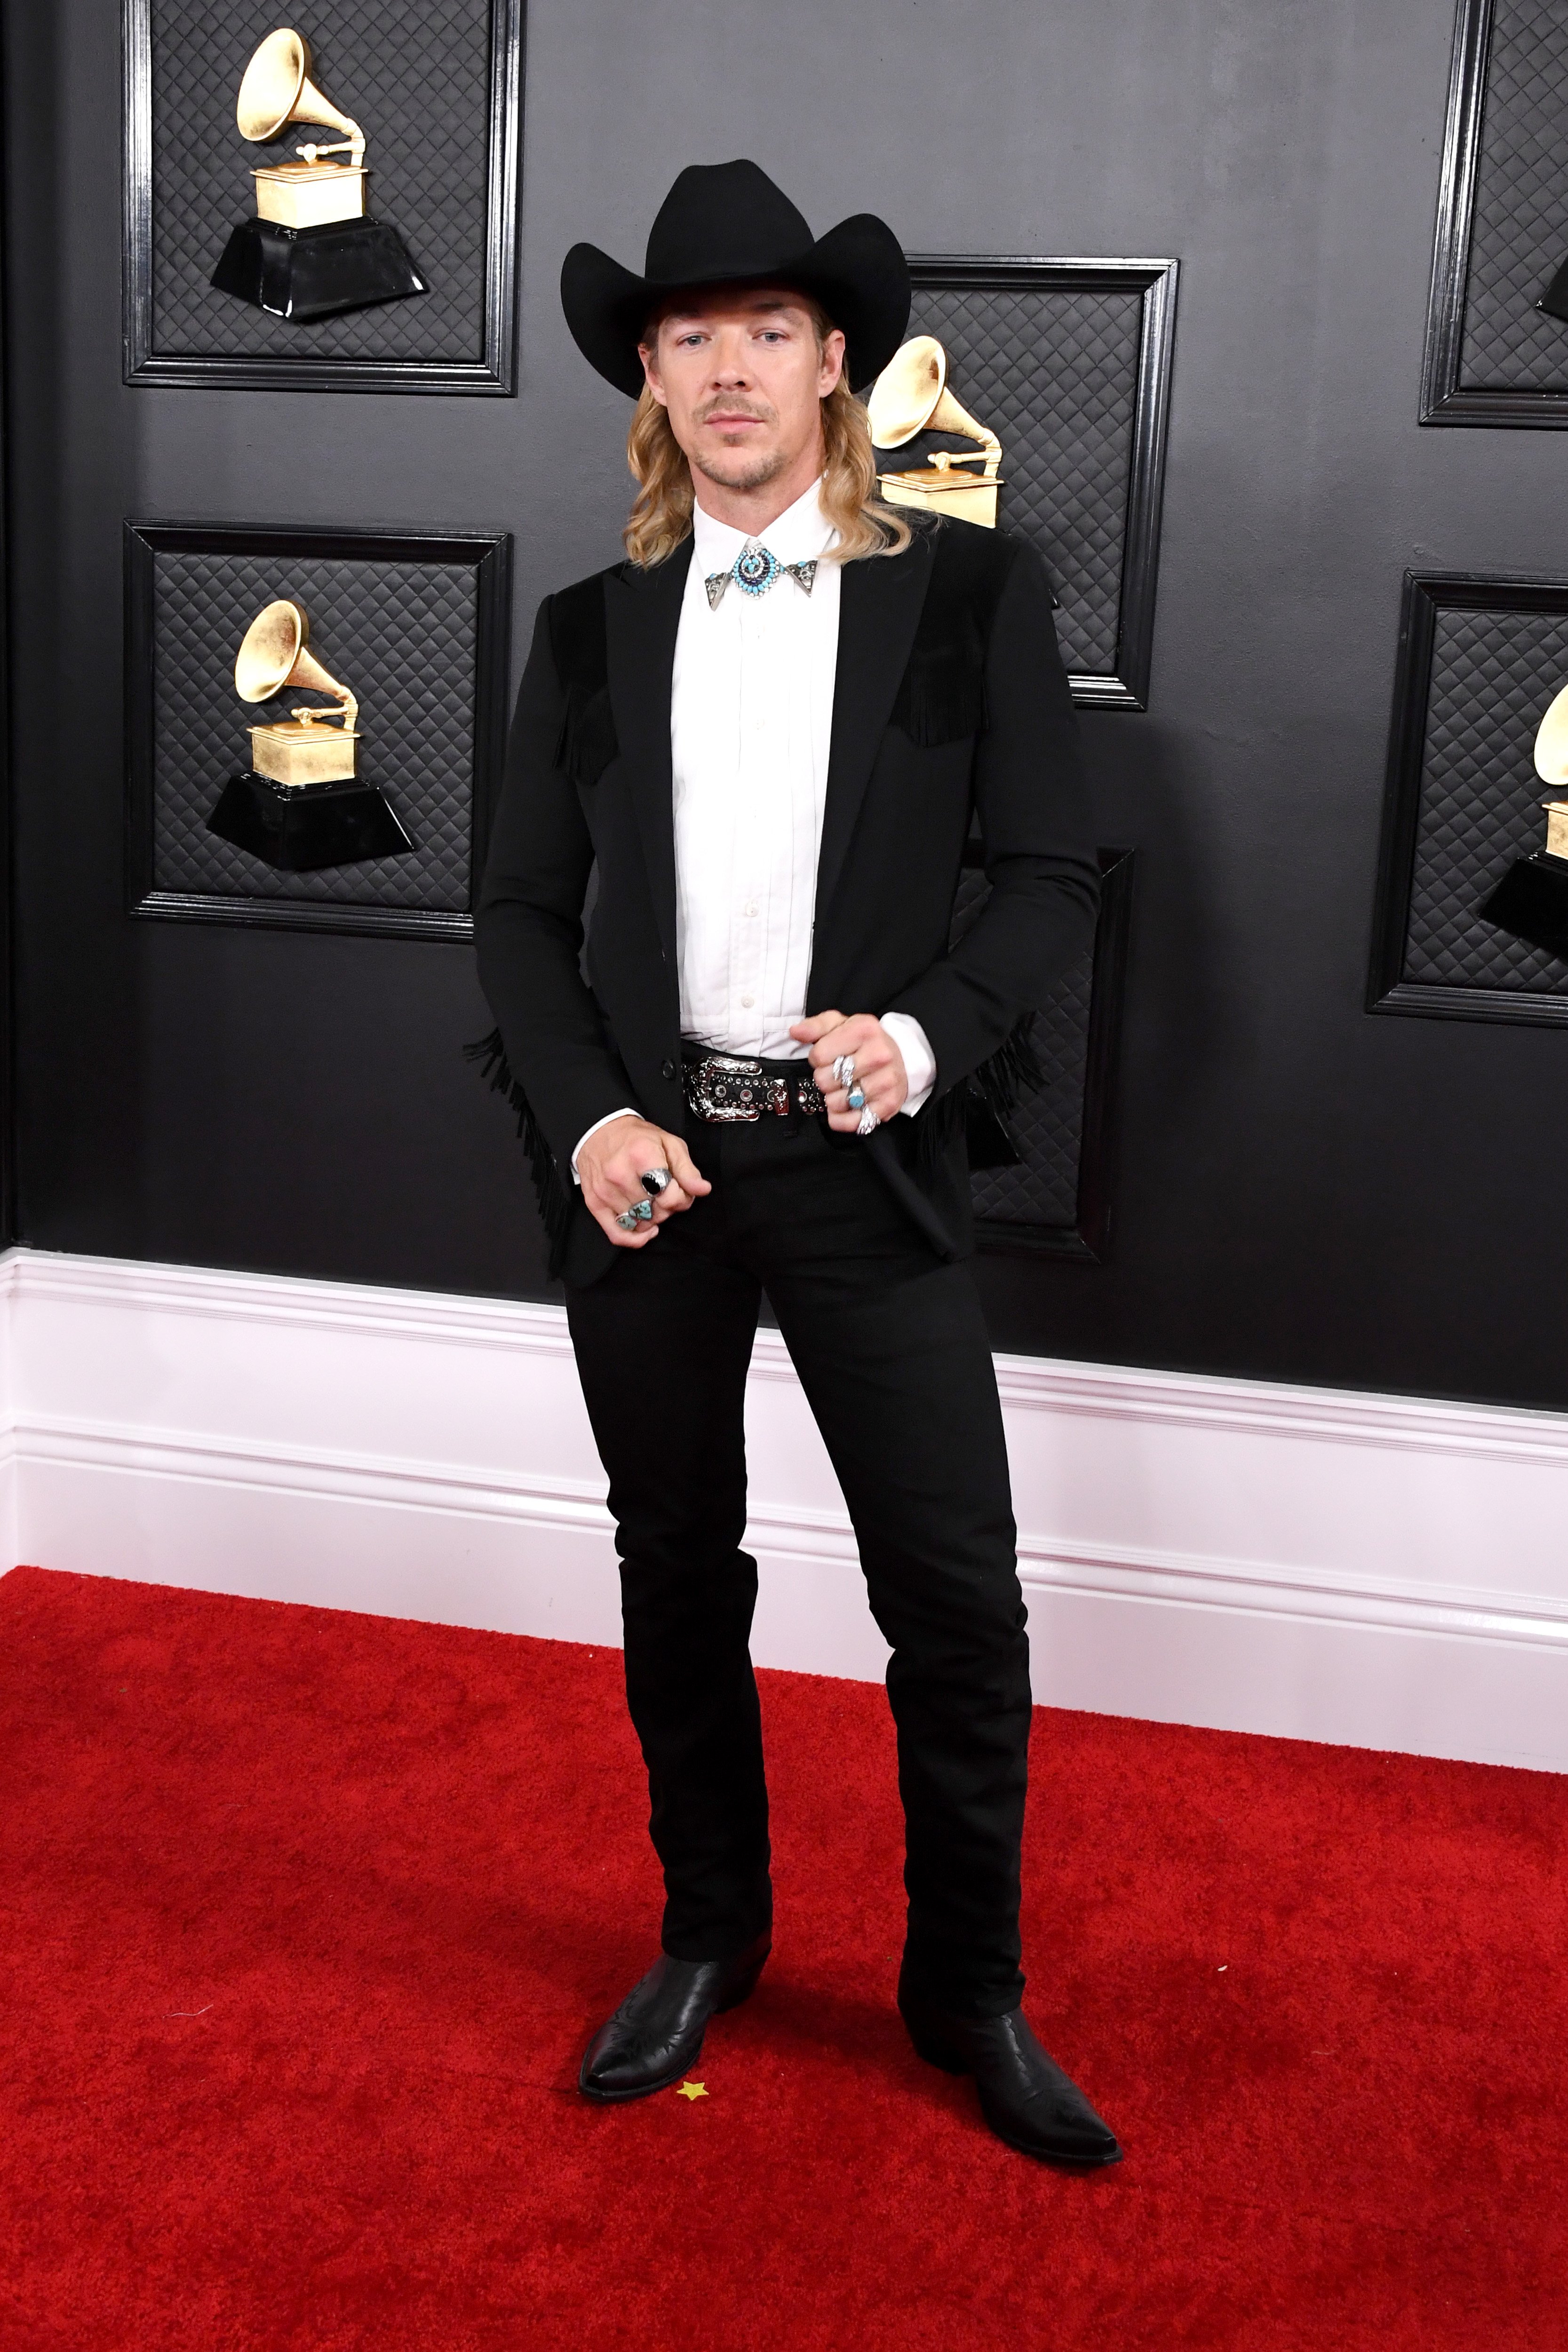 Diplo attends the 62nd Annual GRAMMY Awards at Staples Center on January 26, 2020 | Photo: GettyImages